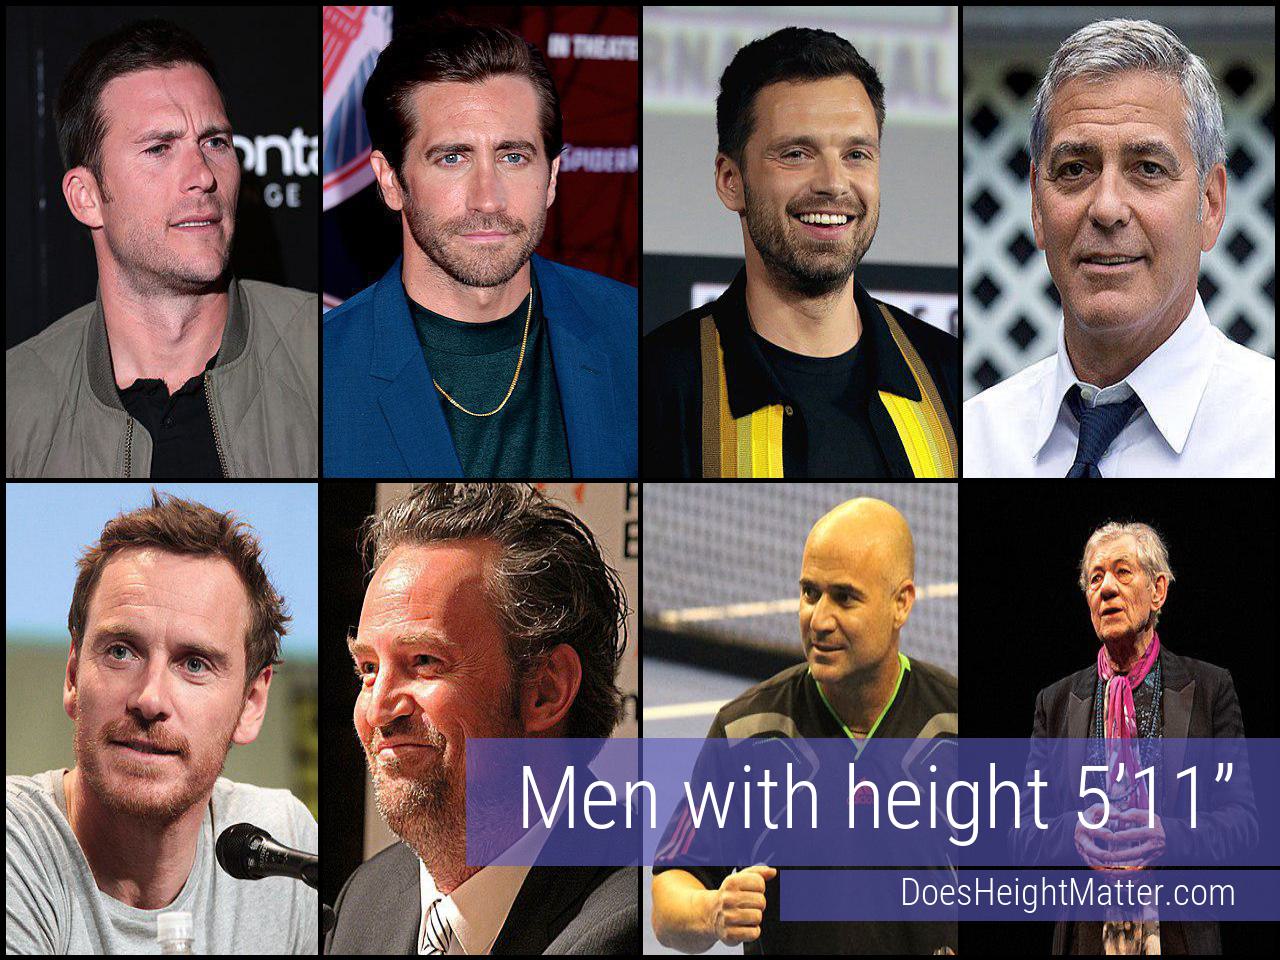 Male celebrities who are 5 ft 11